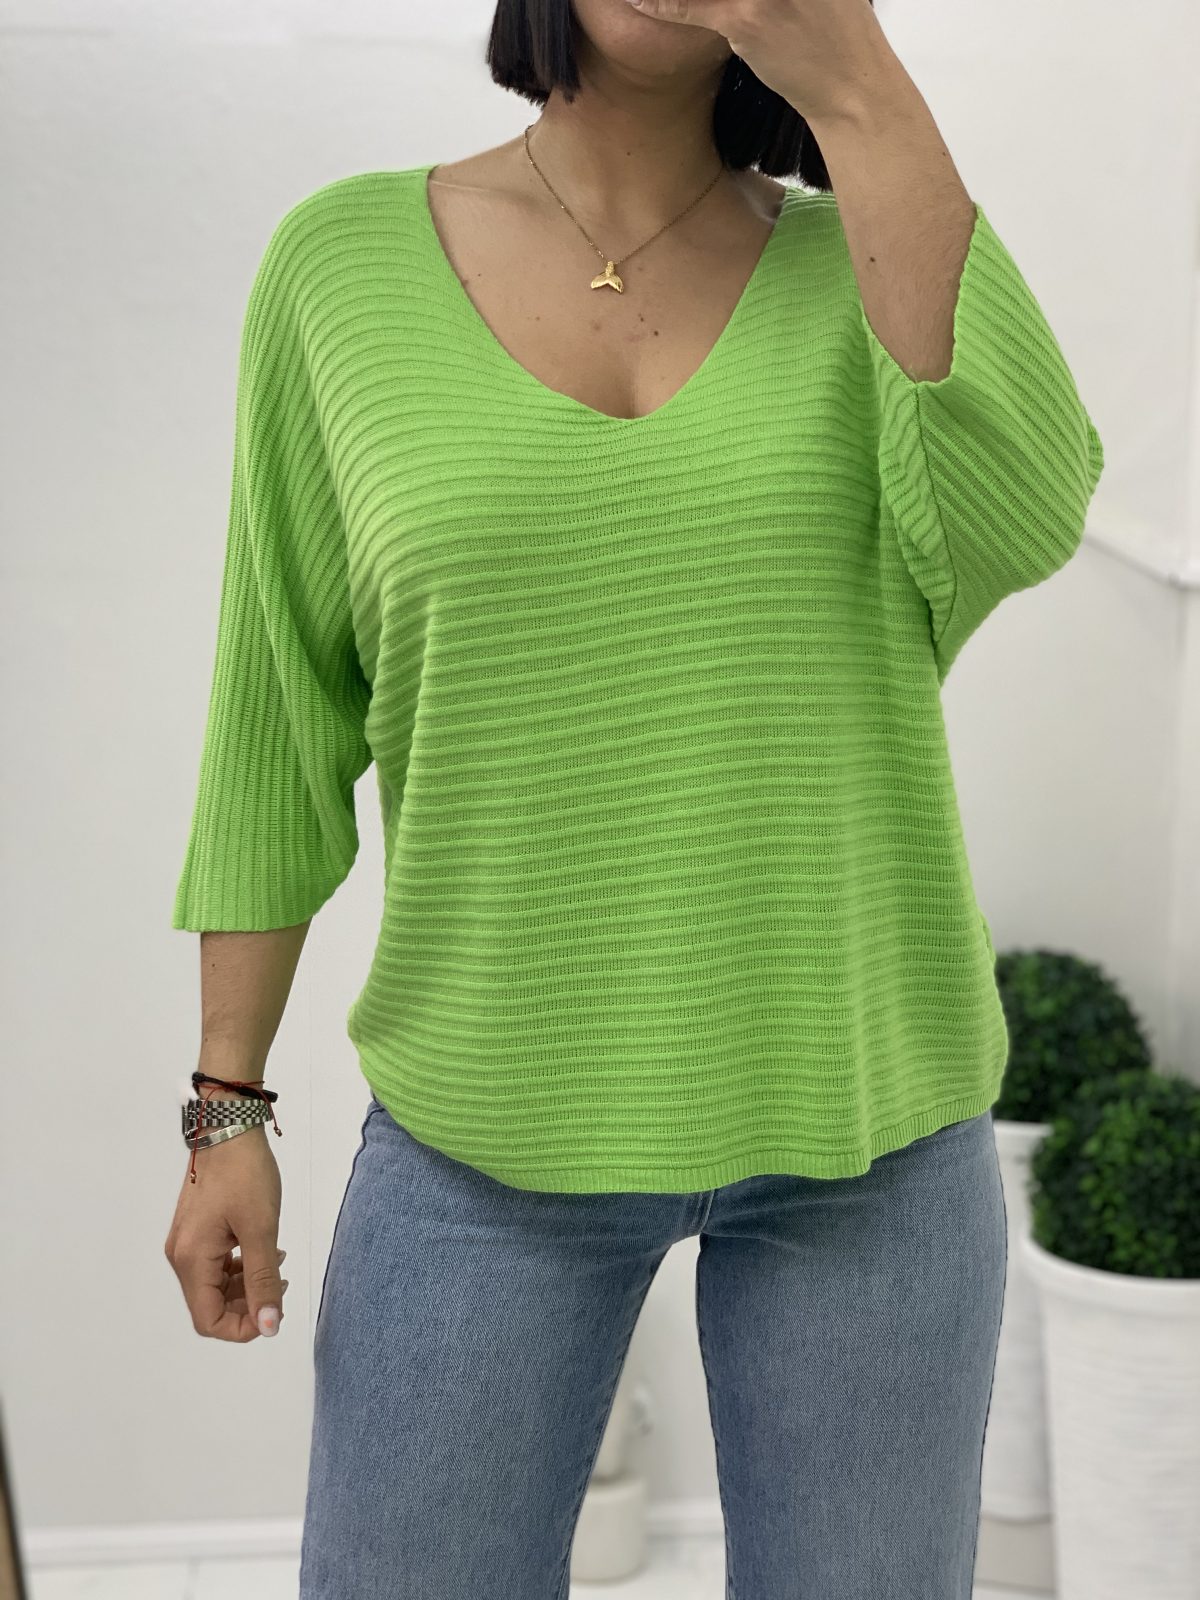 Thin cotton blouse with neckline in green color